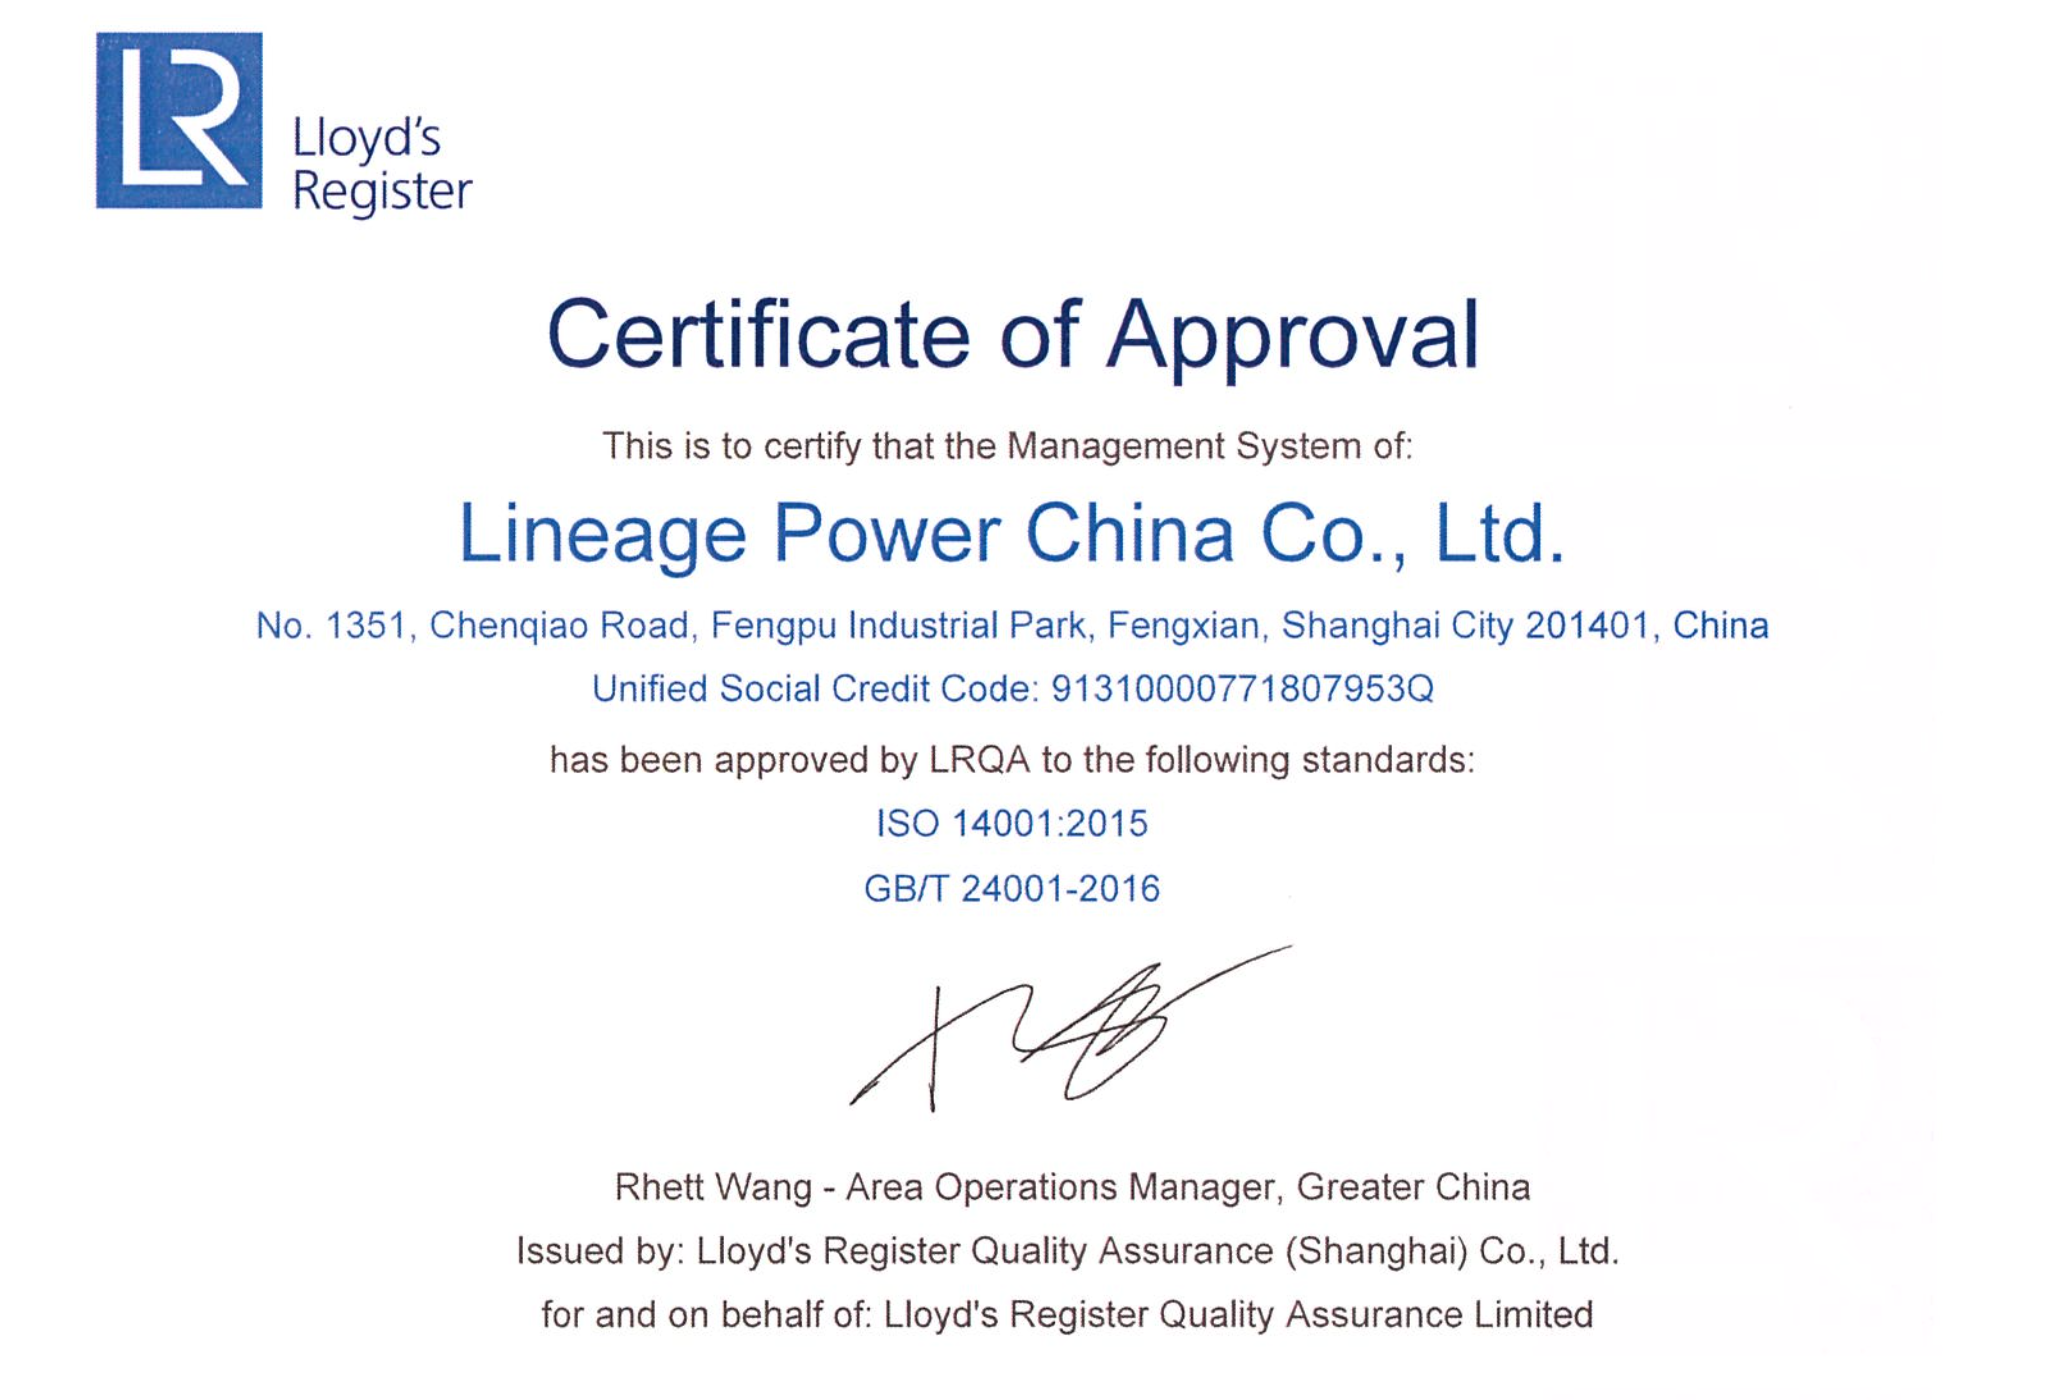 ABB Power Conversion quality and compliance certificate of approval